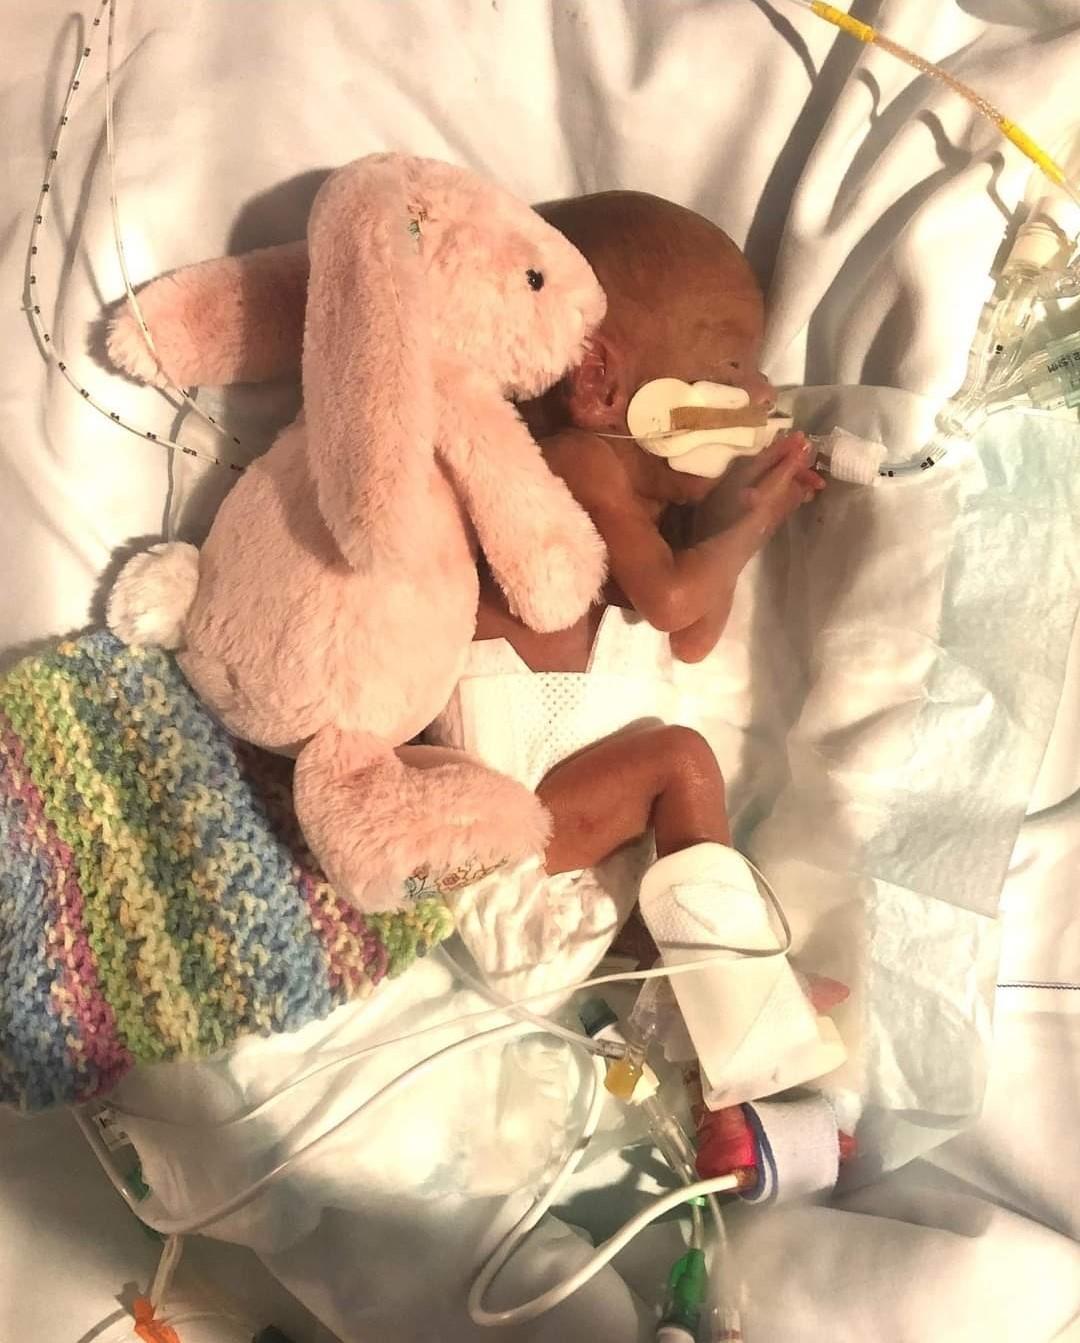 Isla in the NICU with her stuffed bunny. She was later gifted the same bunny on her birthday. (Courtesy of <a href="https://www.instagram.com/isla_of_adventure/">Jasmine Tobias</a>)